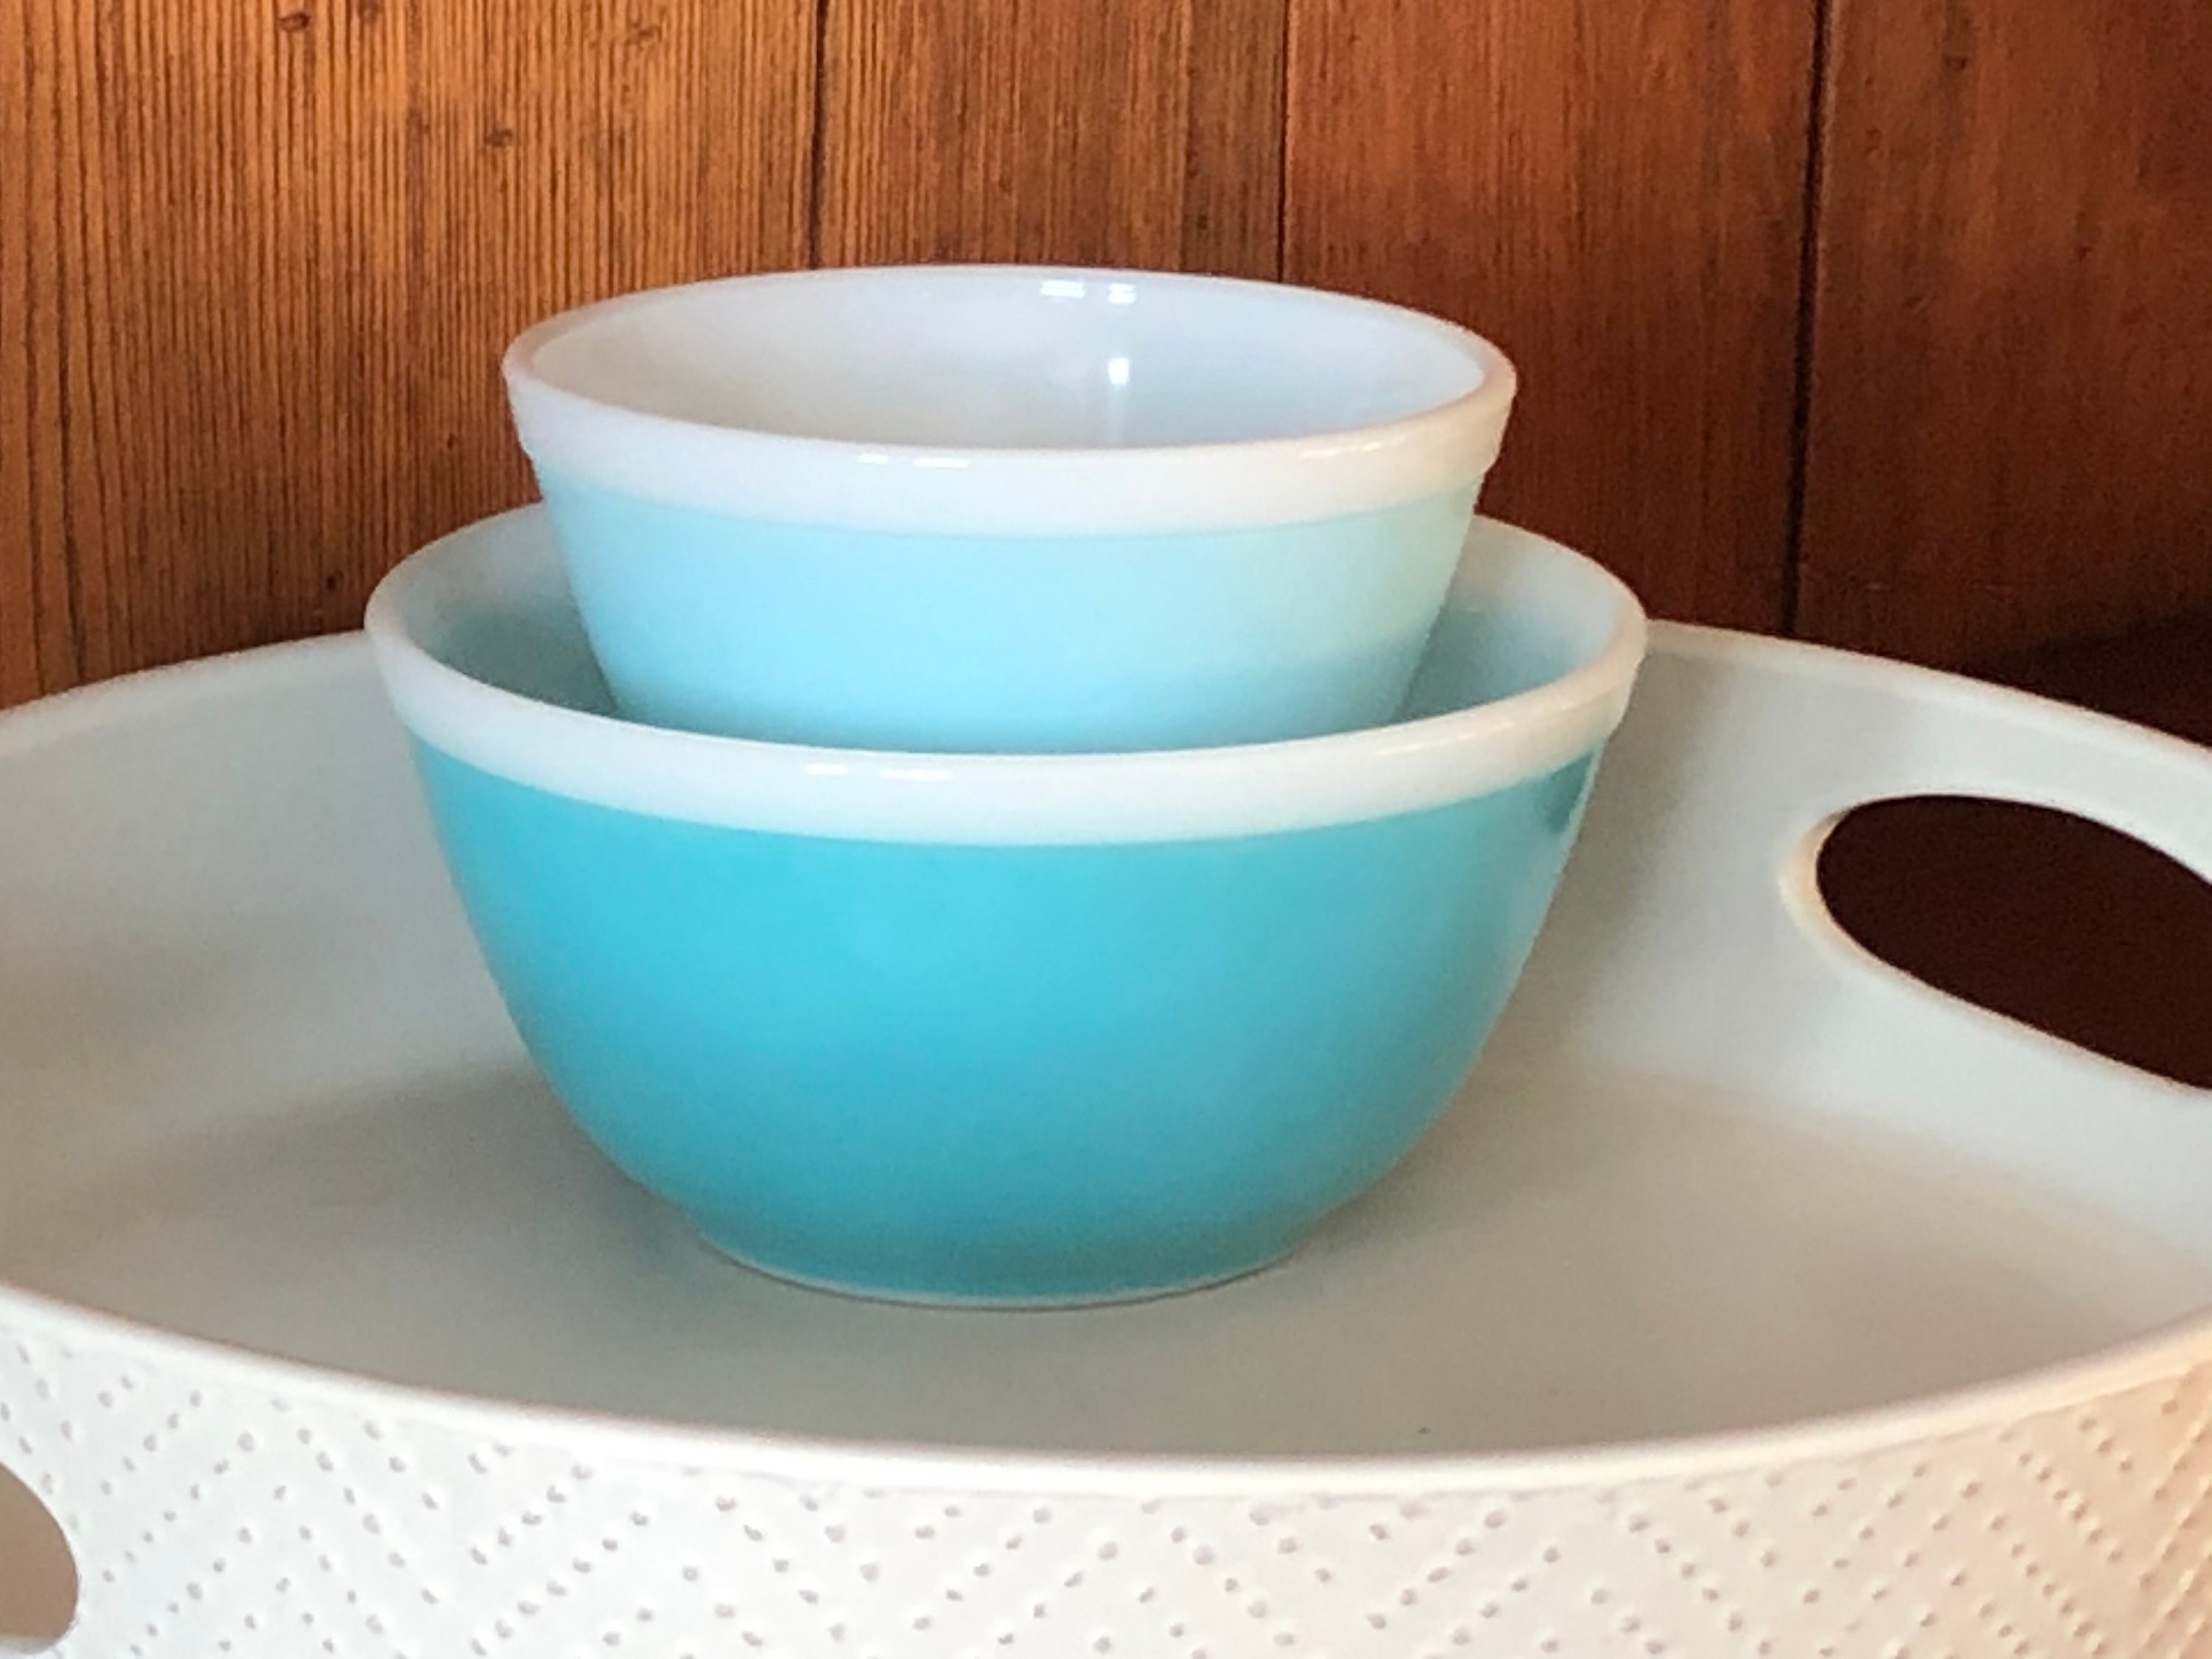 Set of 4 Mint Green / Blue Drips Ceramic Measuring Cup, Nesting Prep Bowls,  Kitchen Gifts by BlueRoomPottery